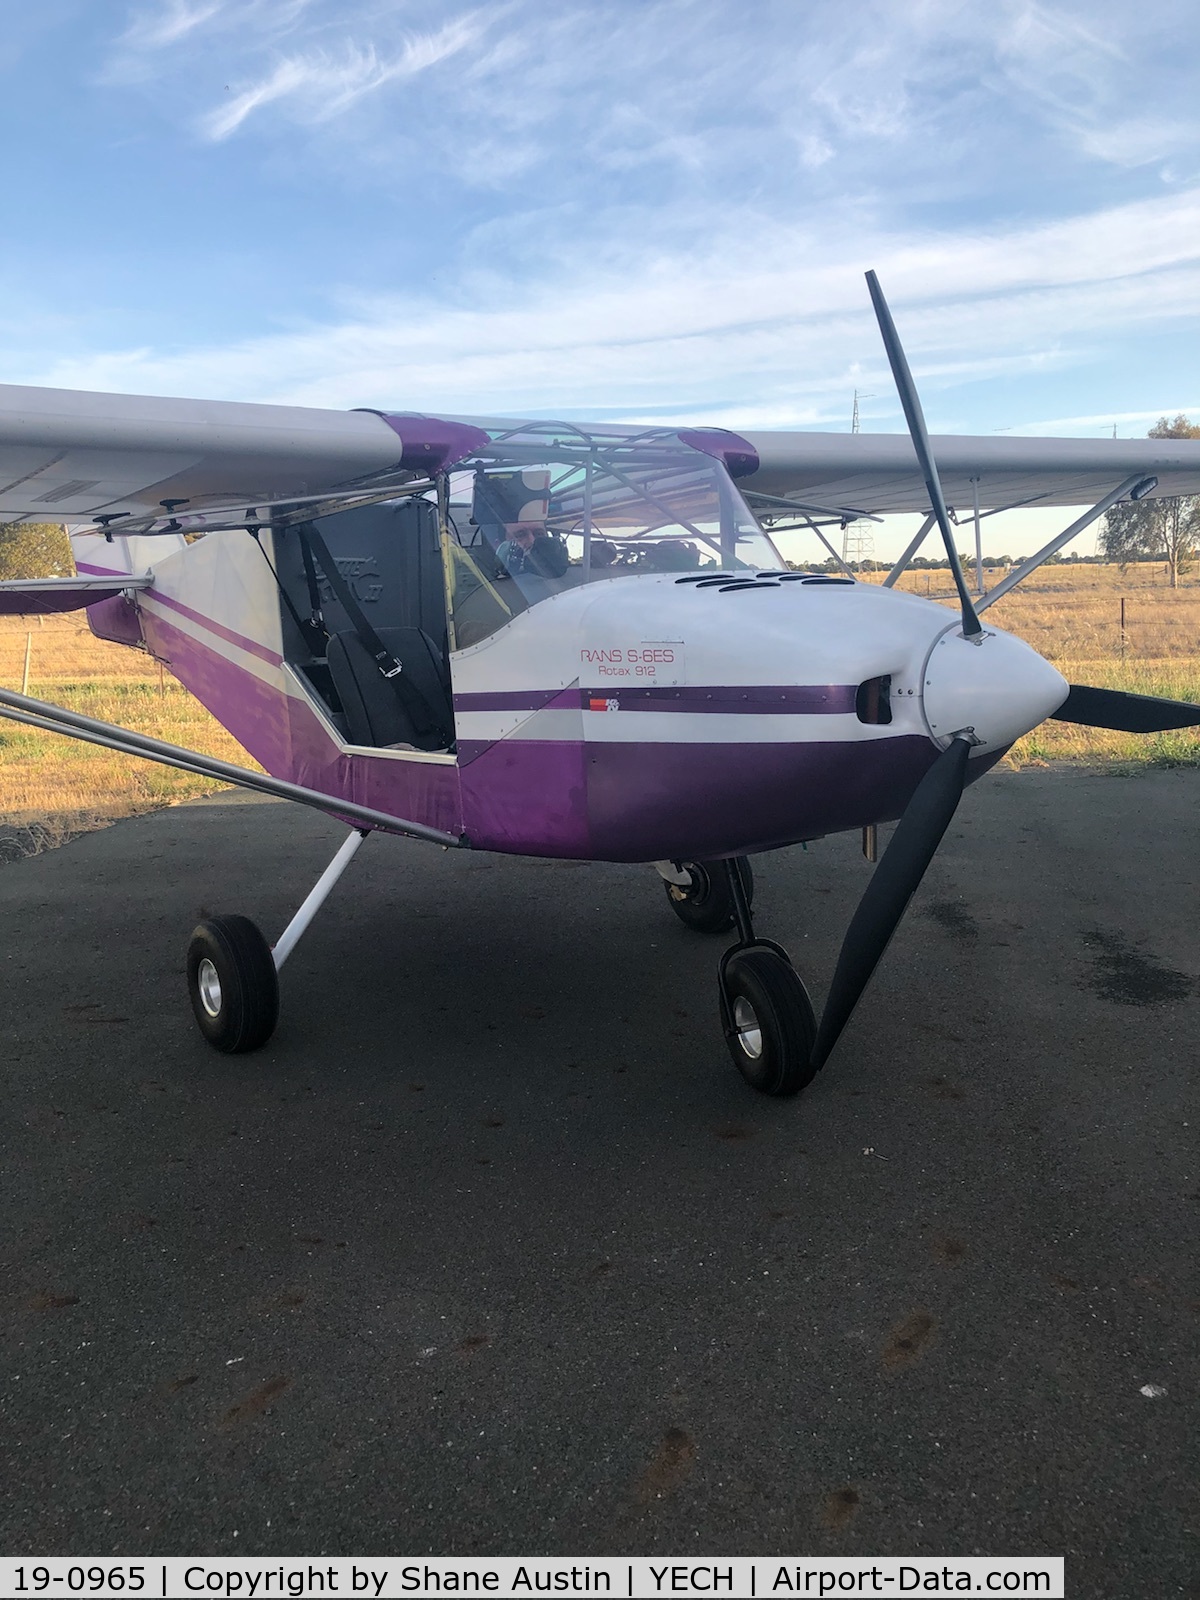 19-0965, 2018 Rans S-6ES Coyote II C/N 01081852, Very capable STOL machine, typical take-off roll on ISA day = 70 meters.
Cruise around 80-85 Kts @4800 RPM.
Very forgiving and fun to fly, live at YECH (Echuca, Victoria - Australia)